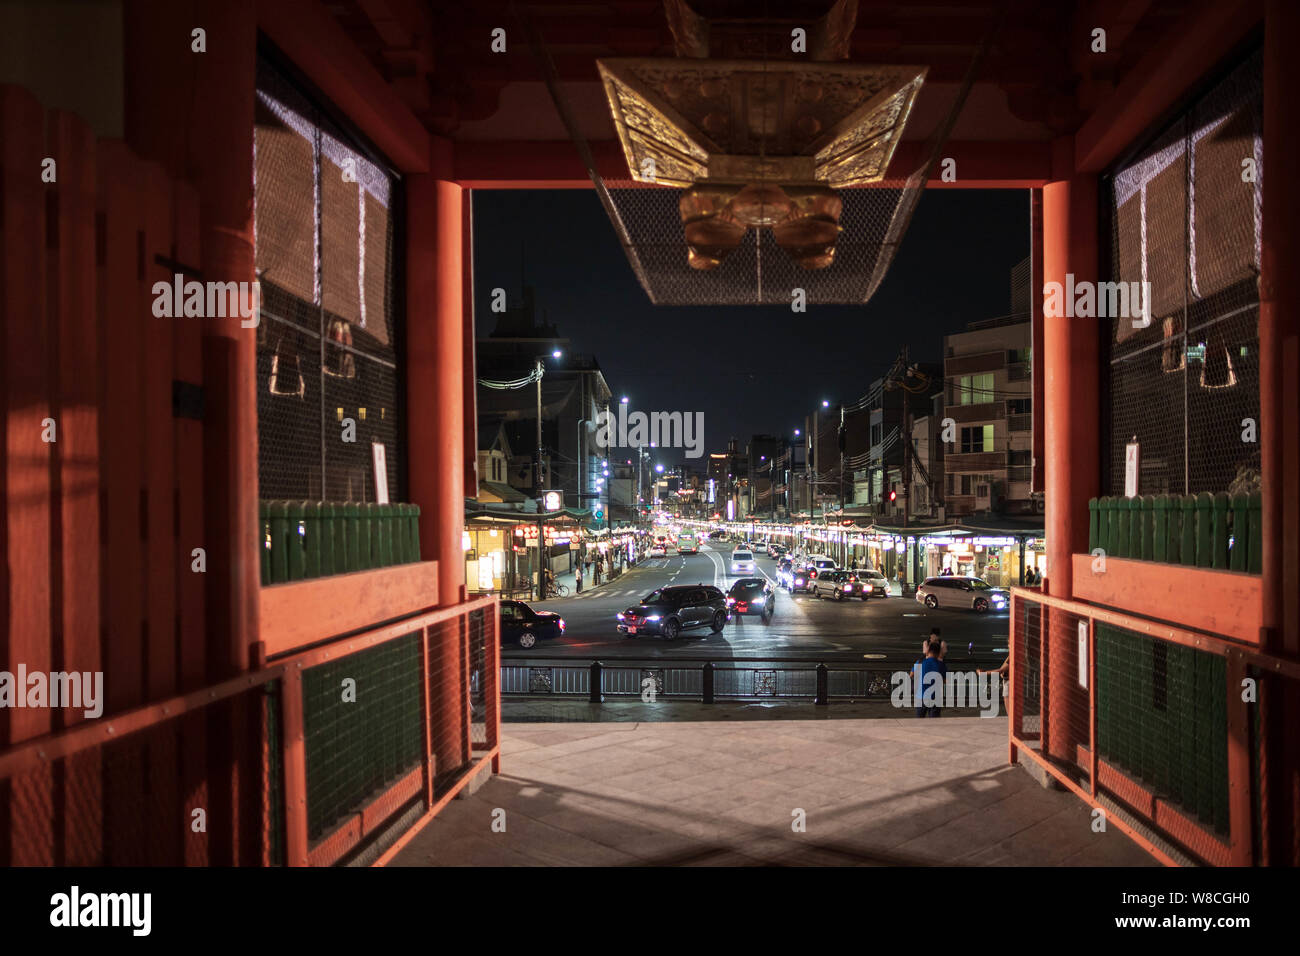 Kyoto, Japan - April 2, 2019: View through temple gate on light traffic moves on main street connecting Gion and Kawaramachi Stock Photo